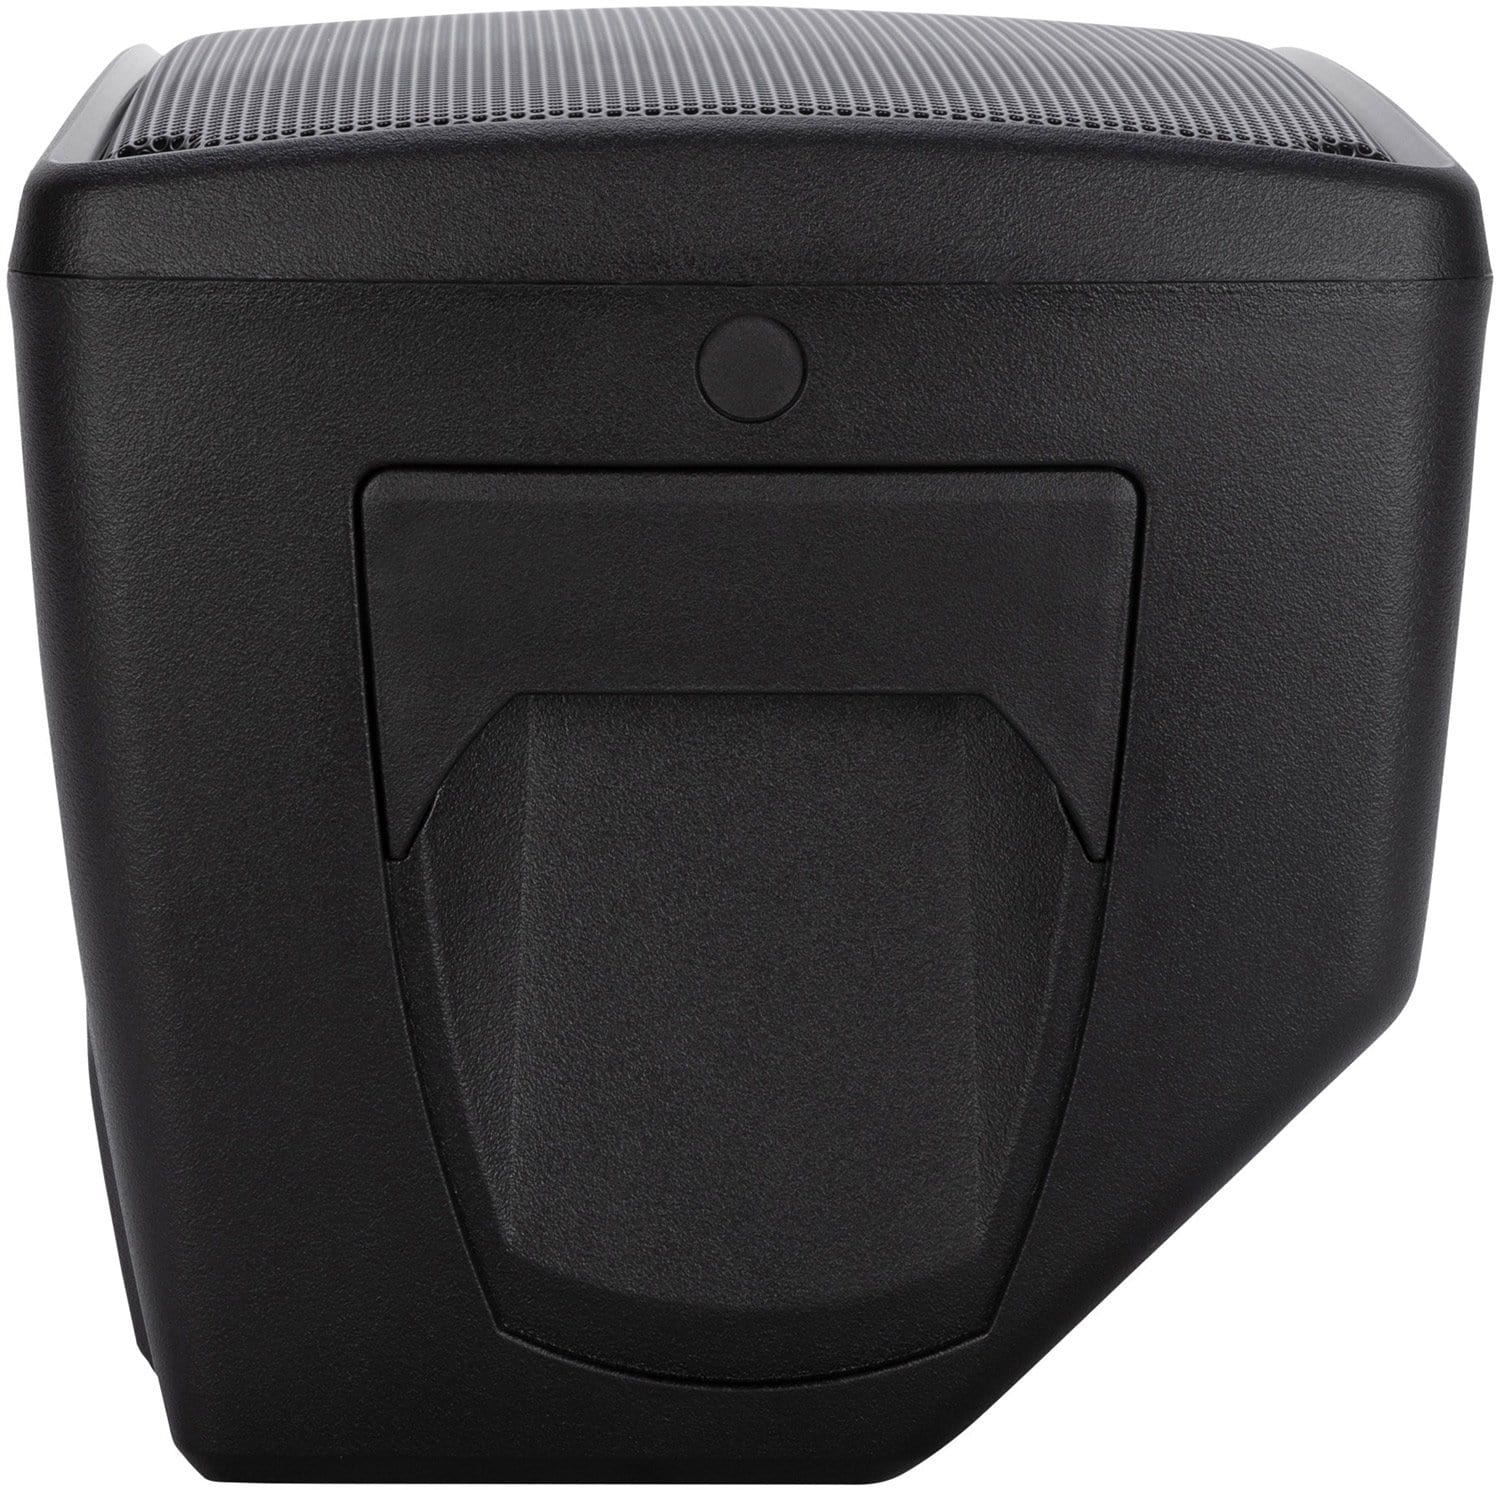 RCF HD10-A MK5 10-Inch 800W 2-Way Powered Speaker - PSSL ProSound and Stage Lighting